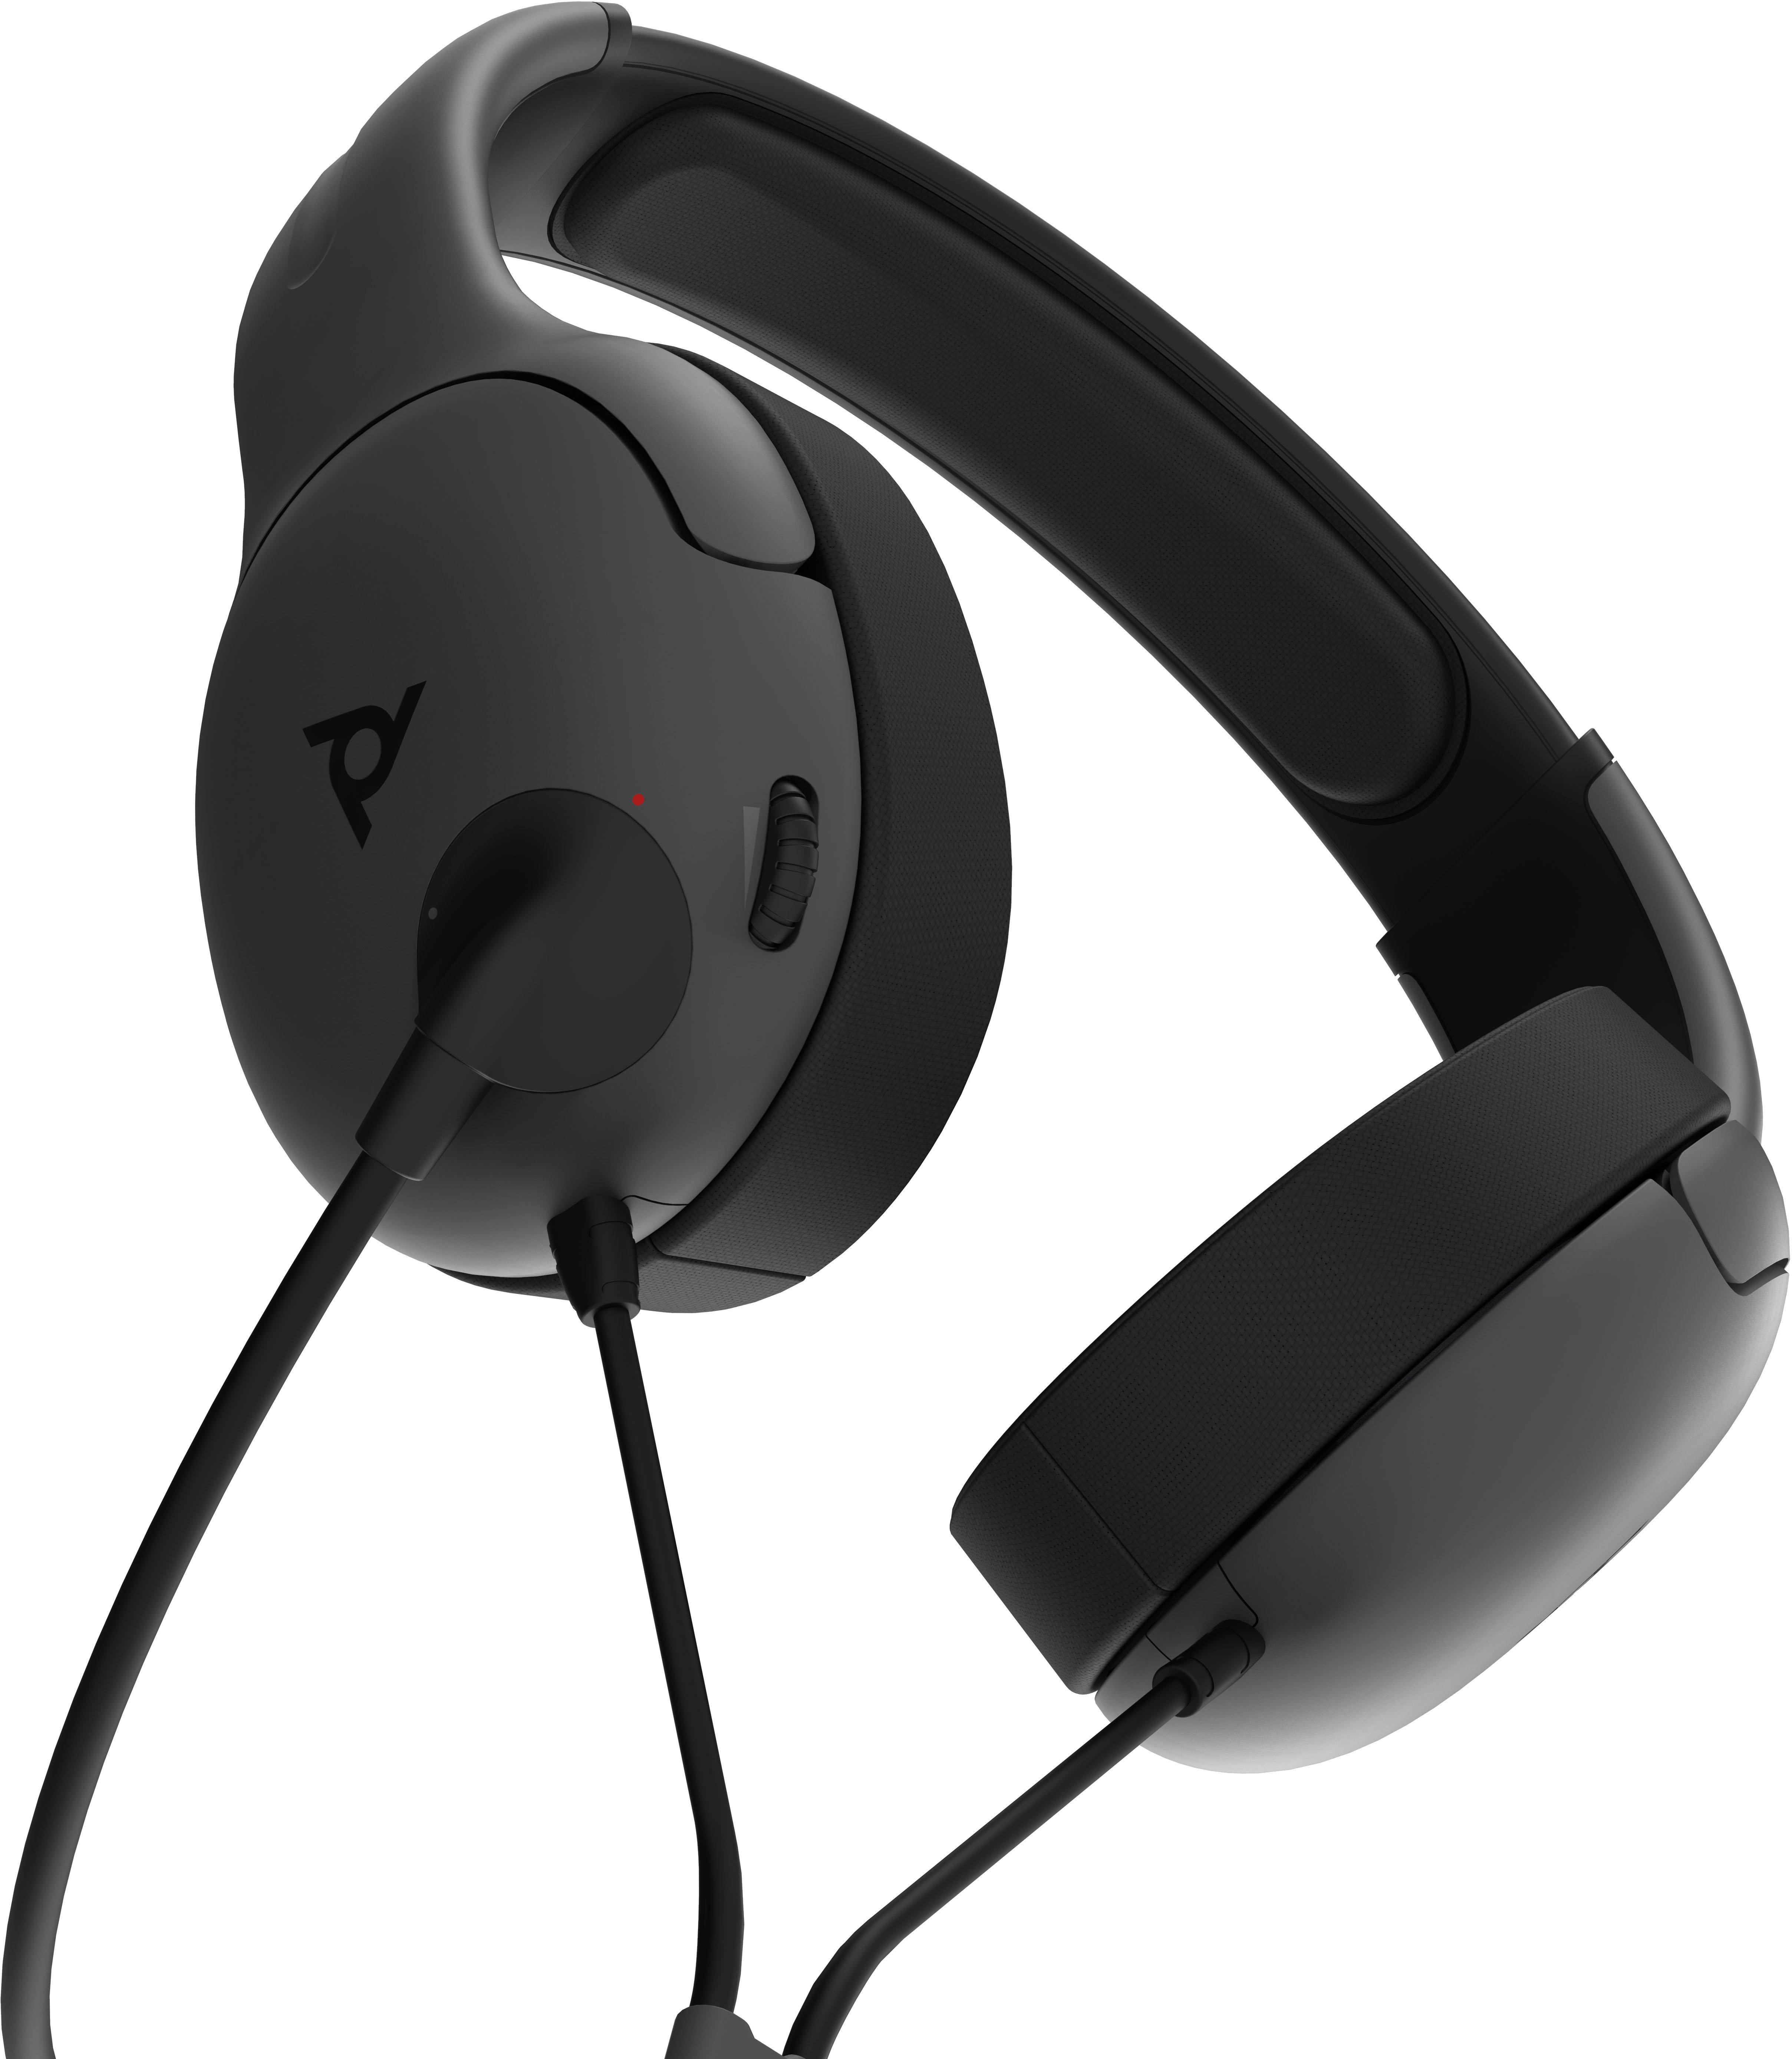 PDP Gaming - LVL40 Stereo Headset for Xbox - Black 